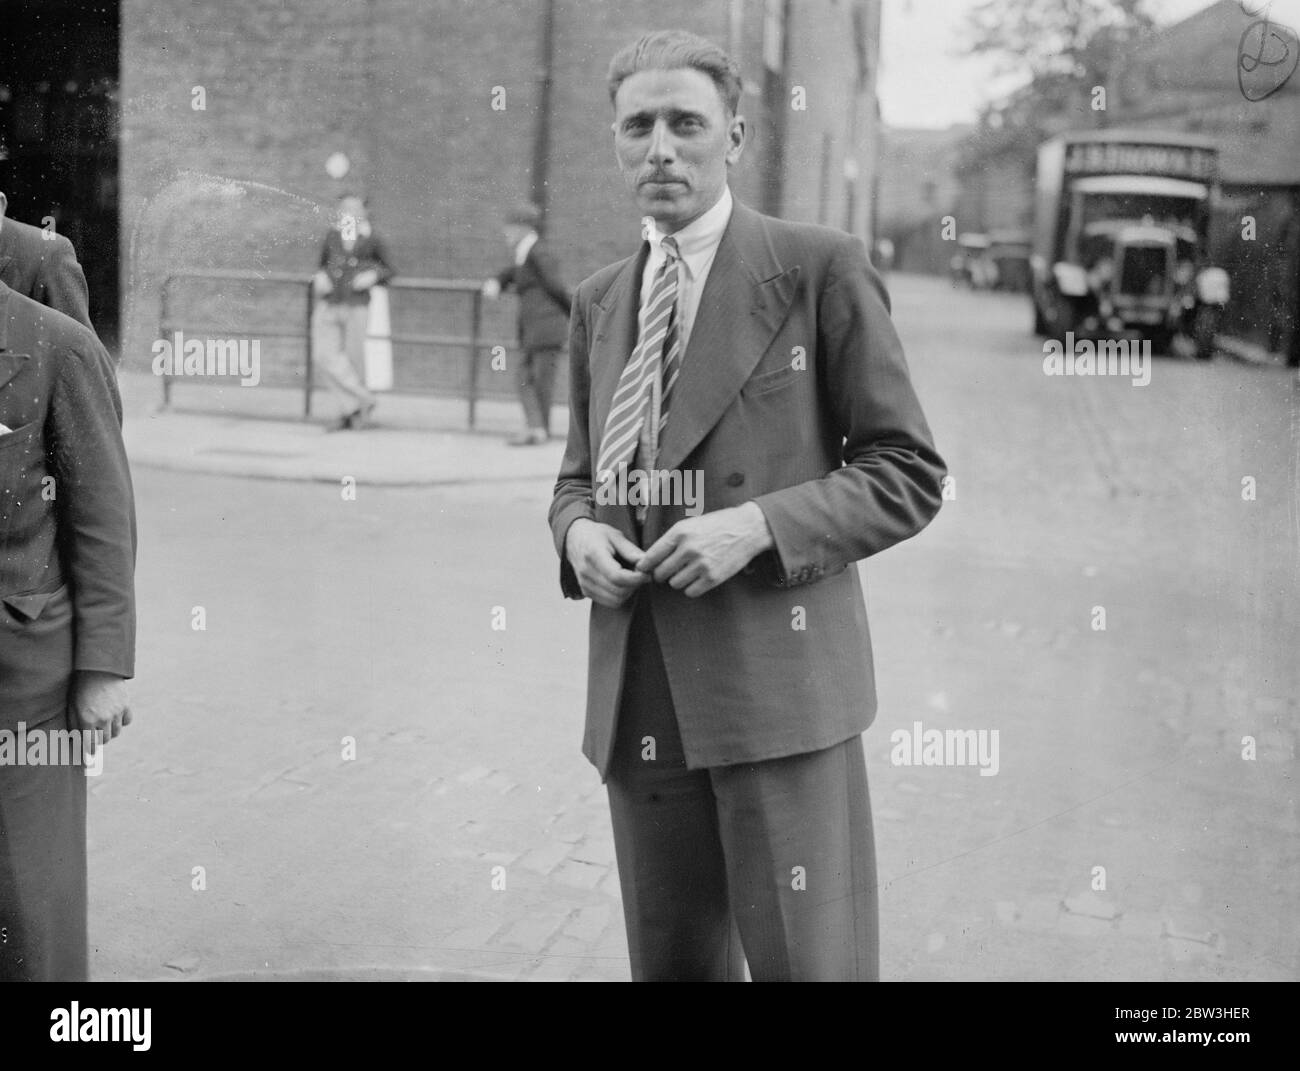 Thousands of London transport workers strike following dismissal of two men . Photo shows , Mr C R Omney , the conductor who was dismissed and later reinstated ( right ) discusseses the situation outside the Nunhead garage . 2 July 1935 Stock Photo